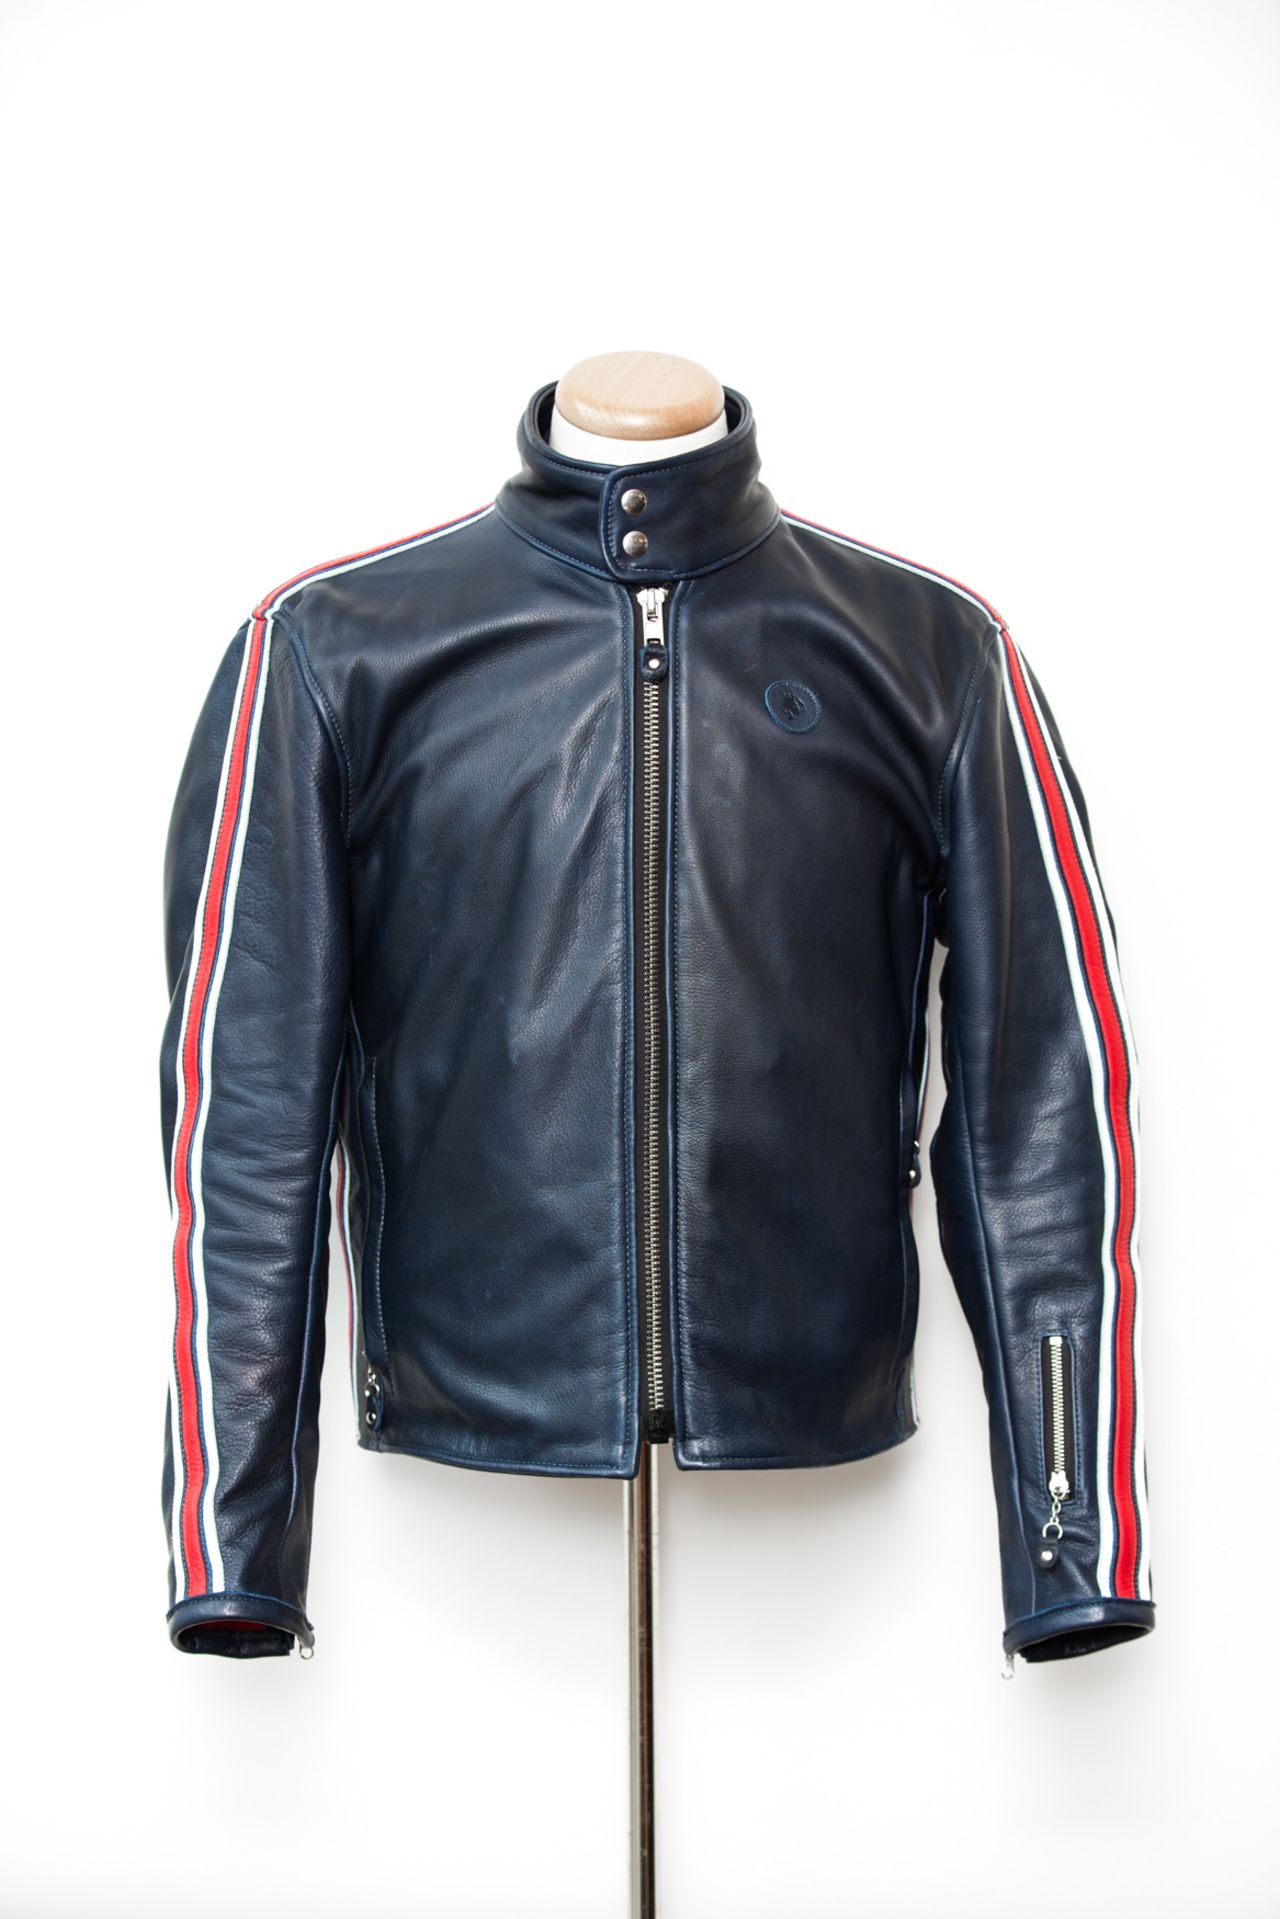 Quinn has also designed his own <a href="http://duncanquinn.com/shop/suits-and-jackets/915-ricard-leather-jacket.html" target="_blank" target="_blank">limited edition motorcycle jacket</a>, dapper enough to be worn with a shirt and tie, custom-made by Massachusetts-based <a href="http://www.vansonleathers.com/" target="_blank" target="_blank">Vanson Leathers</a>. <br /><br />His favorite bikes? "For character and cool, 1970s Laverdas and MV Augustas or a vintage Ducati. To clear the cobwebs out, any Ducati superbike, but my preference is an SPS 916 or 996. Or for pure hooligan adrenaline rush, an Aprilia RSV APRC Factory."